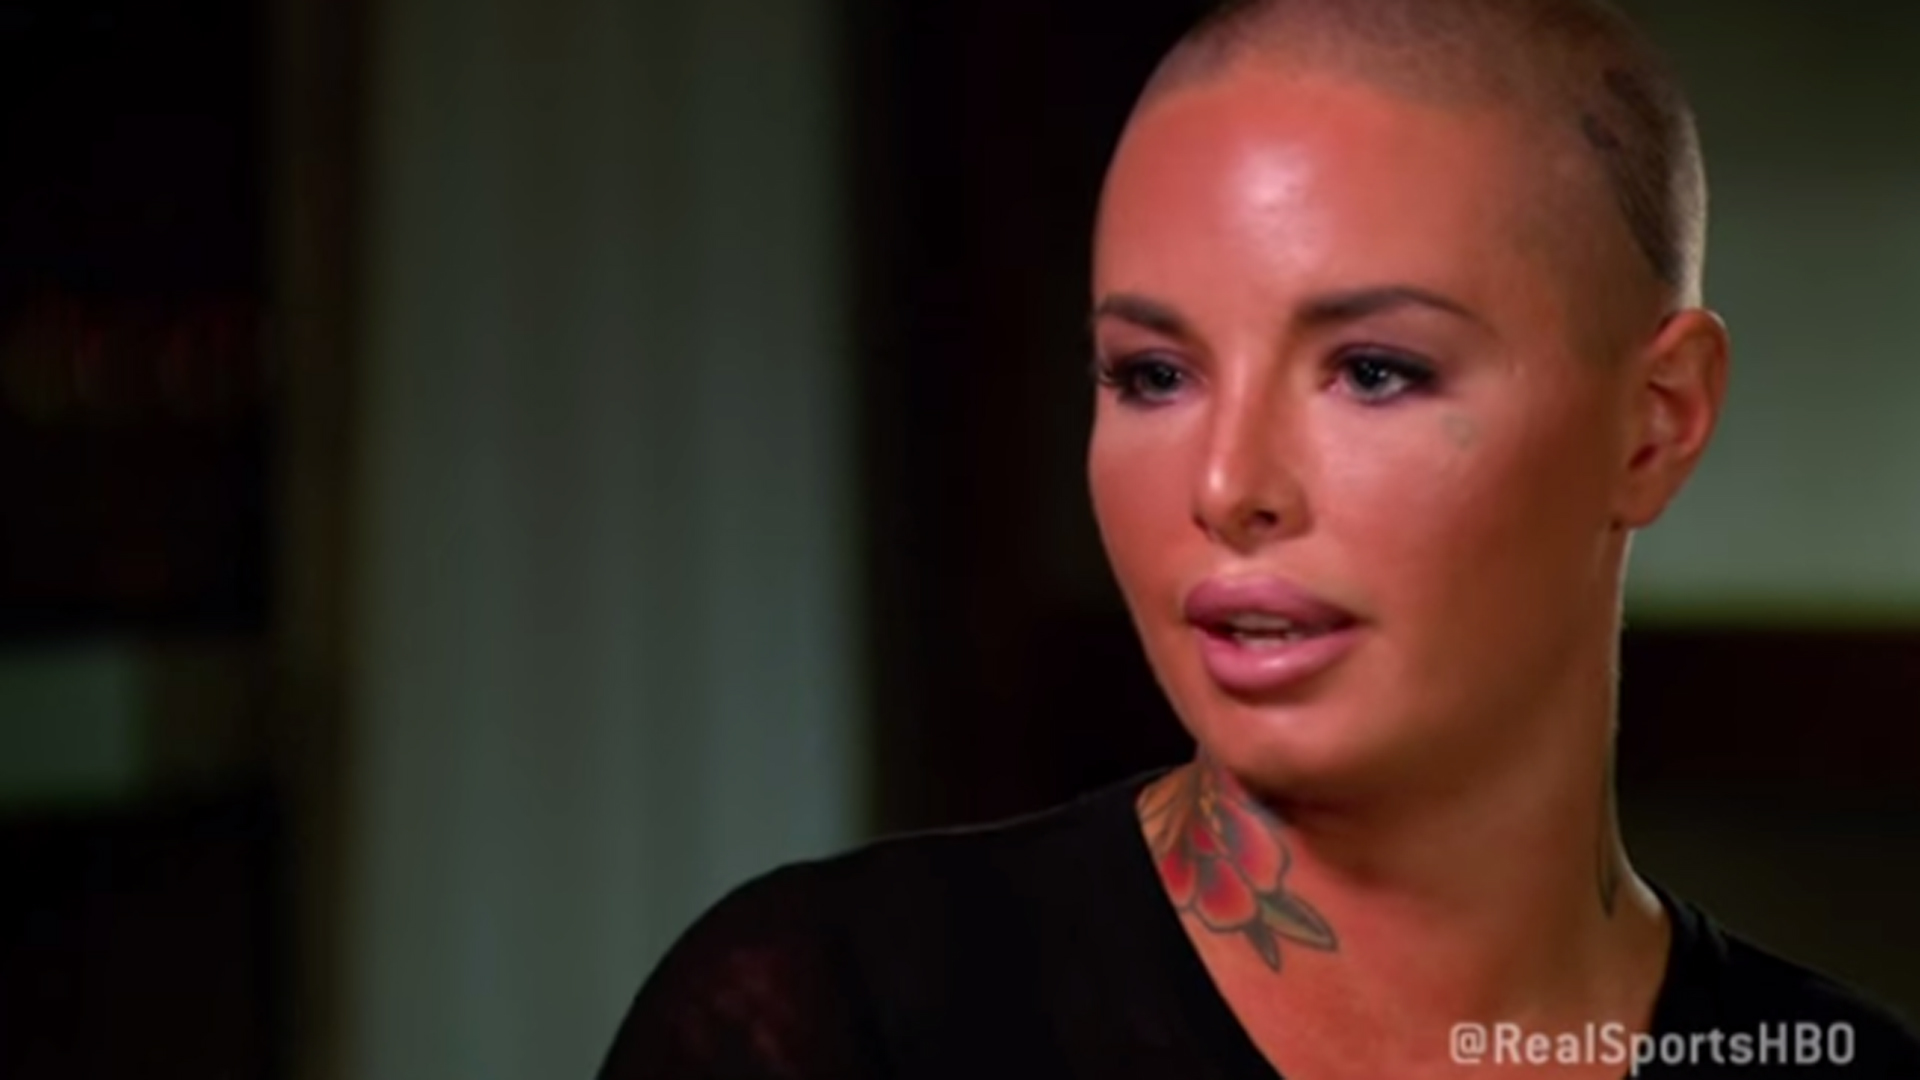 Christy Mack details horrific attack from MMA fighter in gripping HBO ...